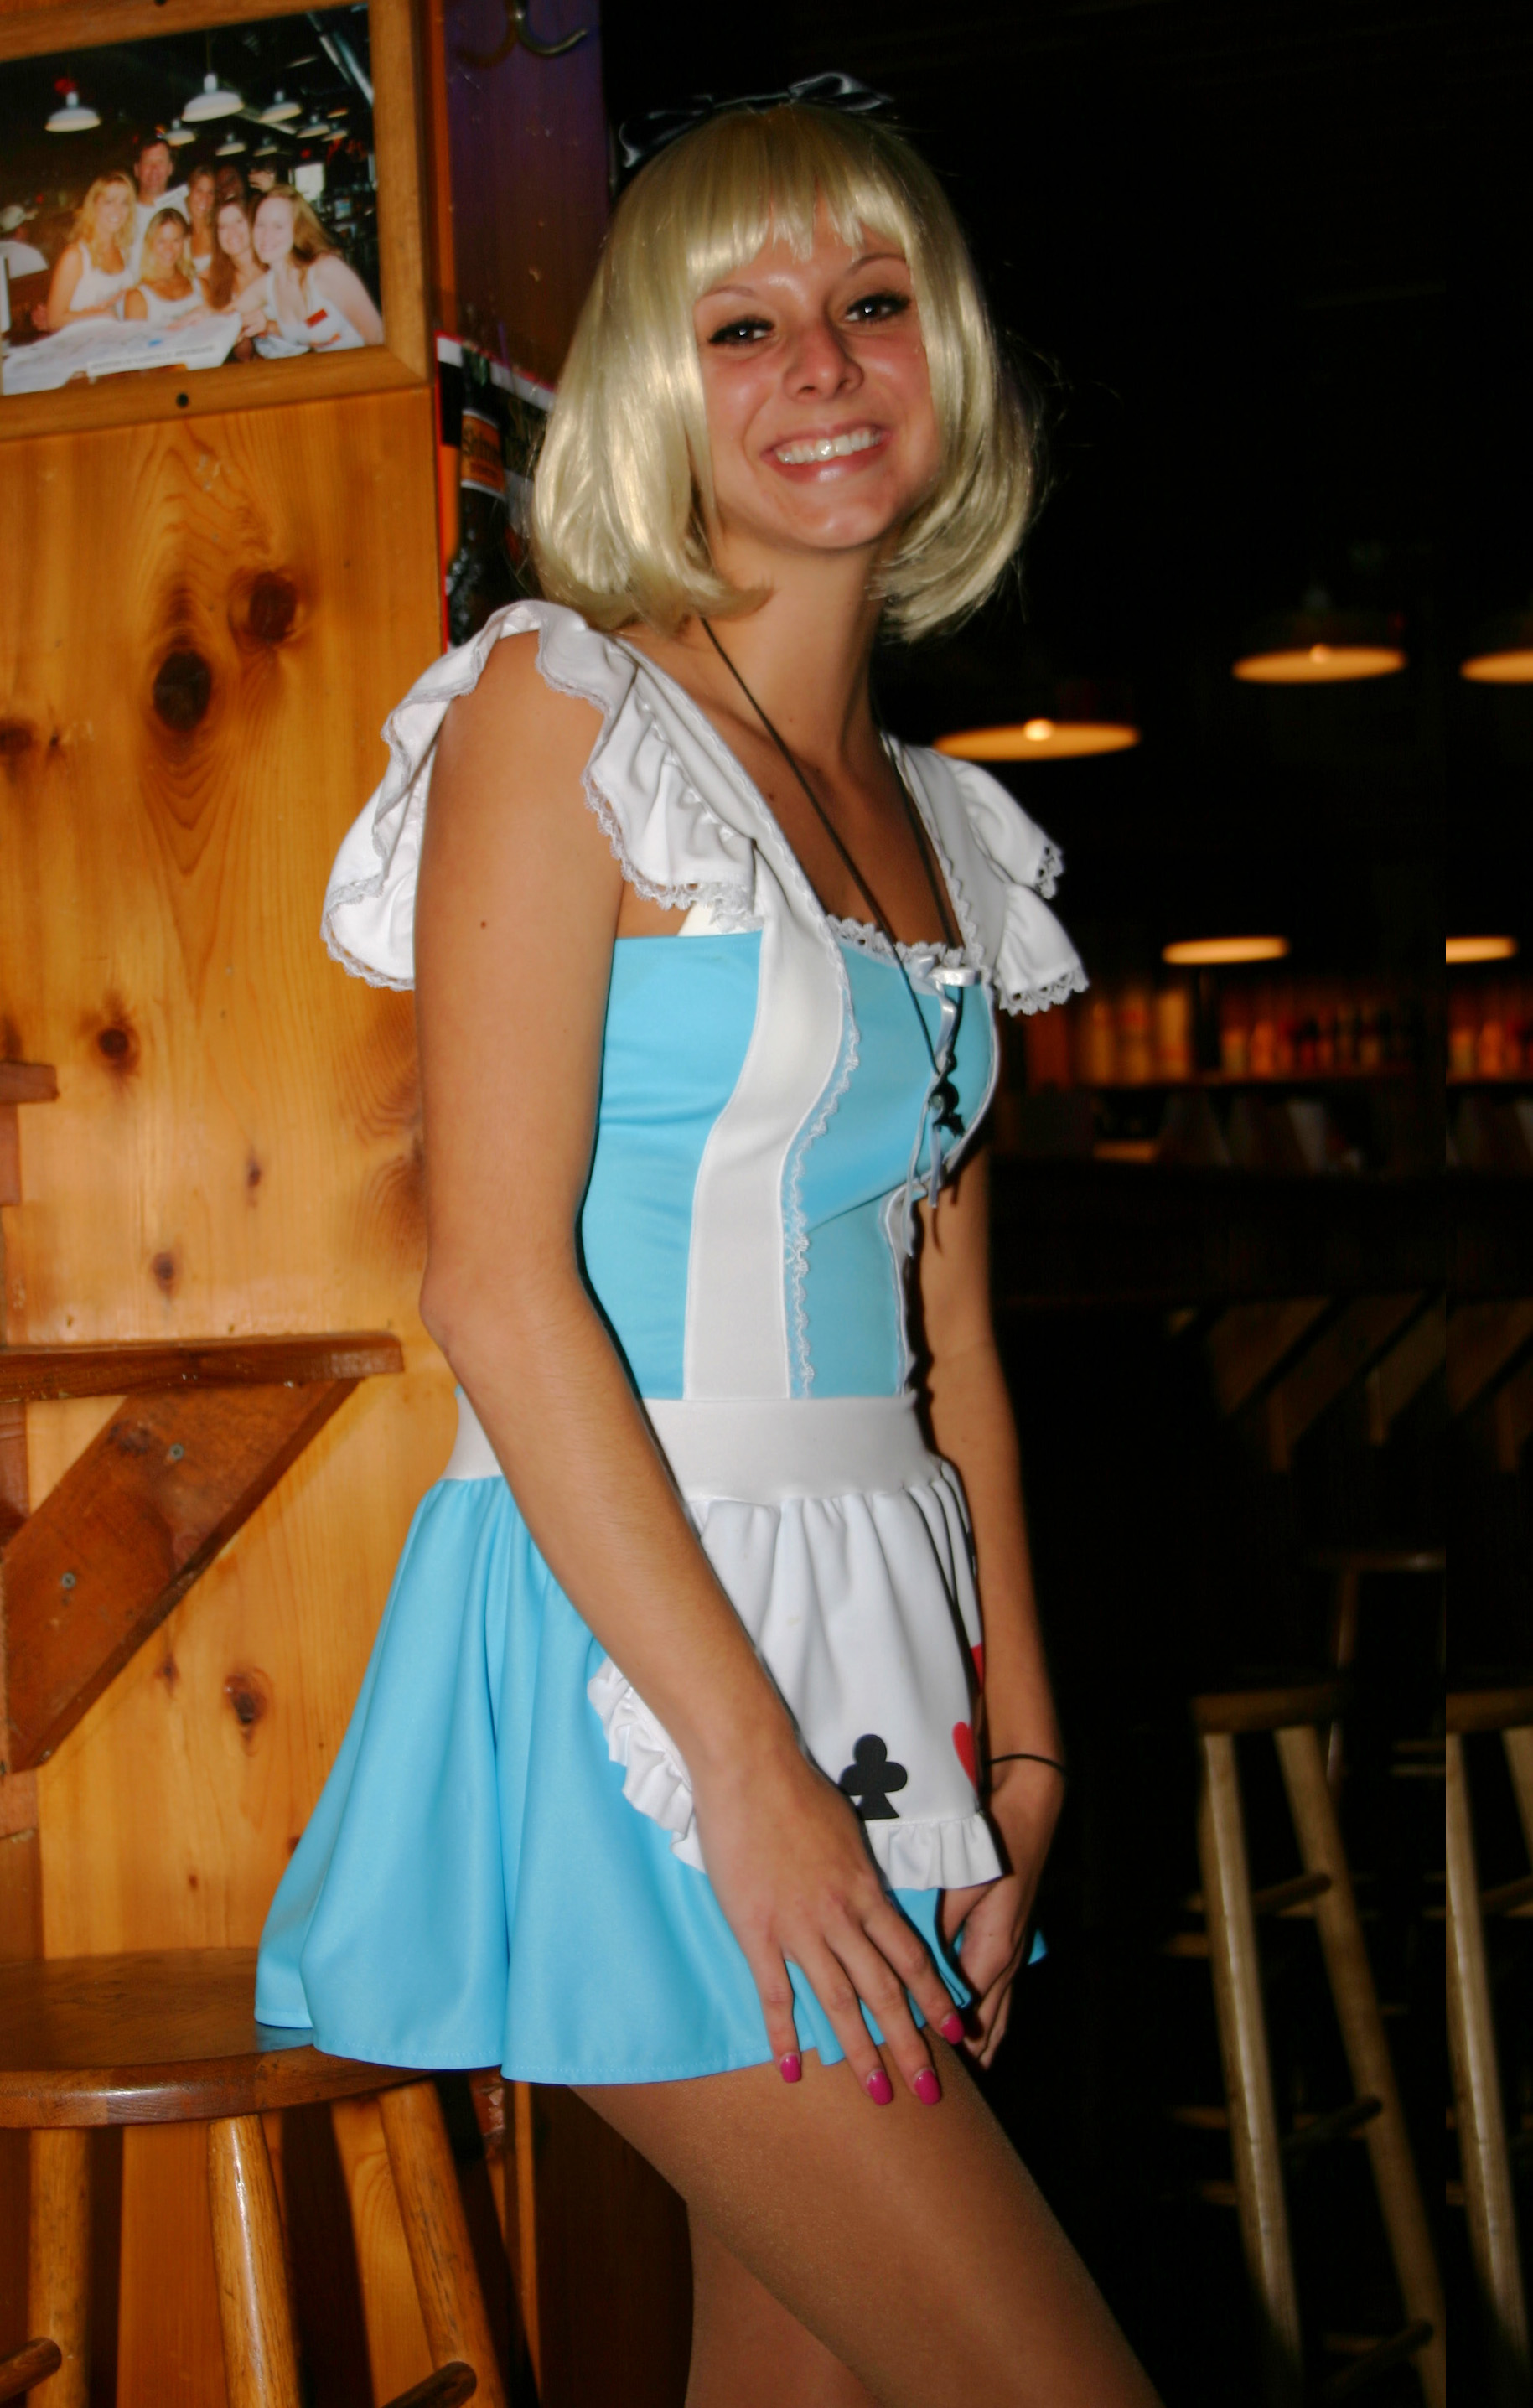 Guys Who Dress As Girls - Make Your Evening Special